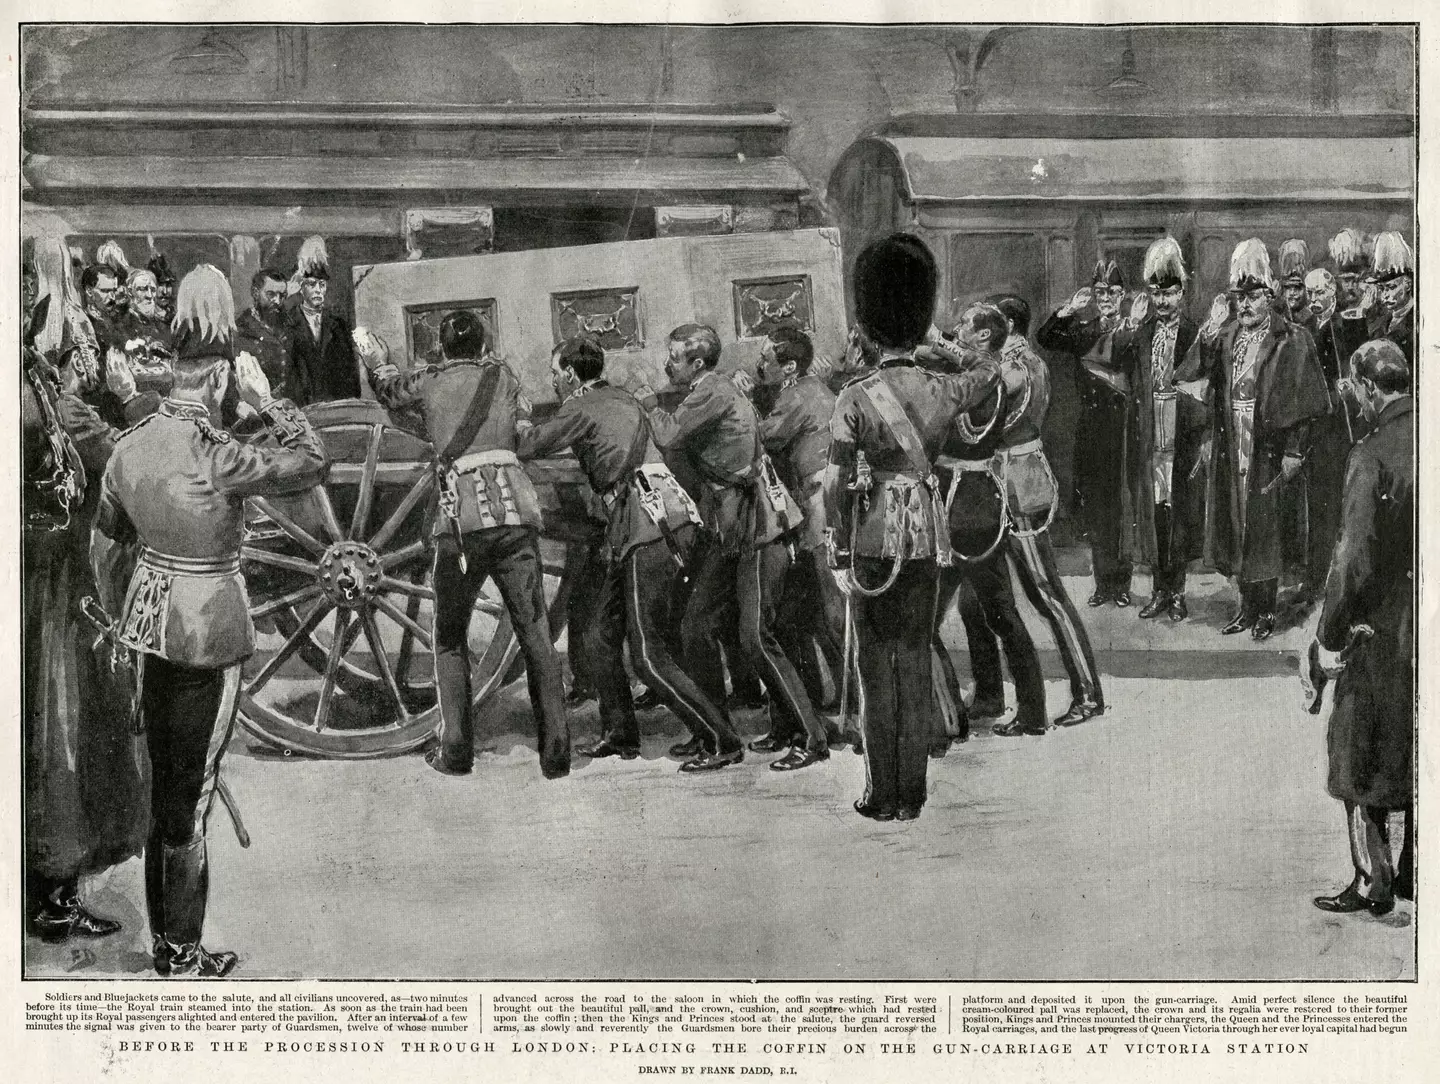 Soldiers load Queen Victoria's coffin onto the carriage.